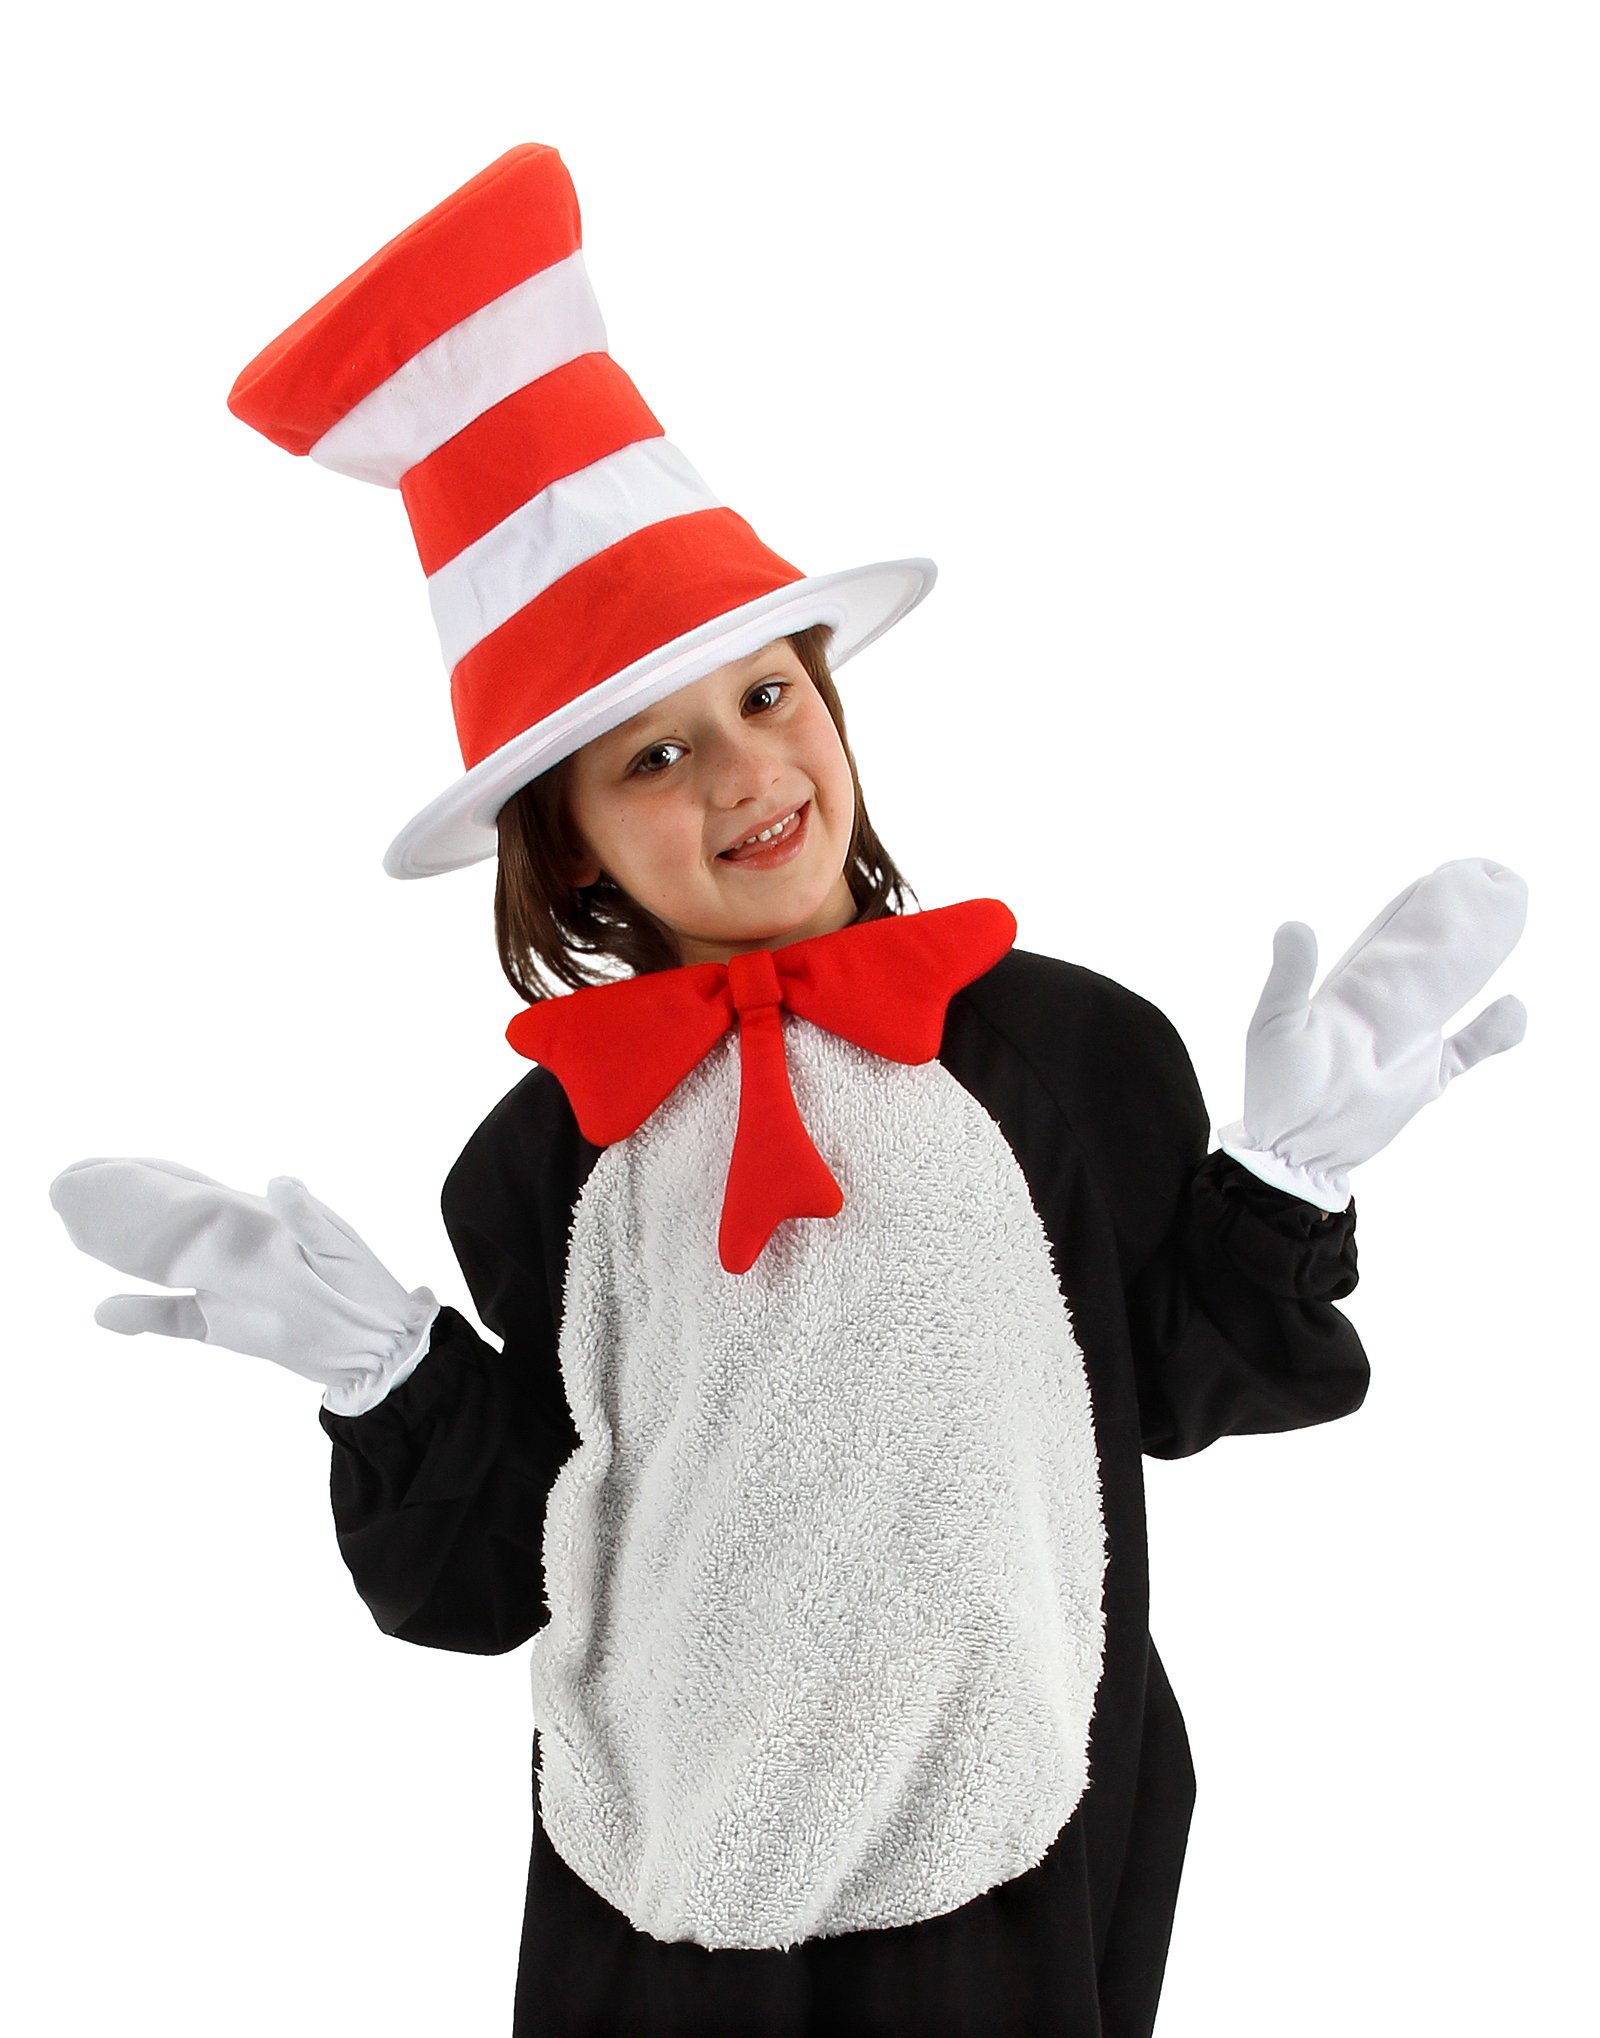 Dr. Seuss The Cat in the Hat - The Cat in the Hat Accessory Kit